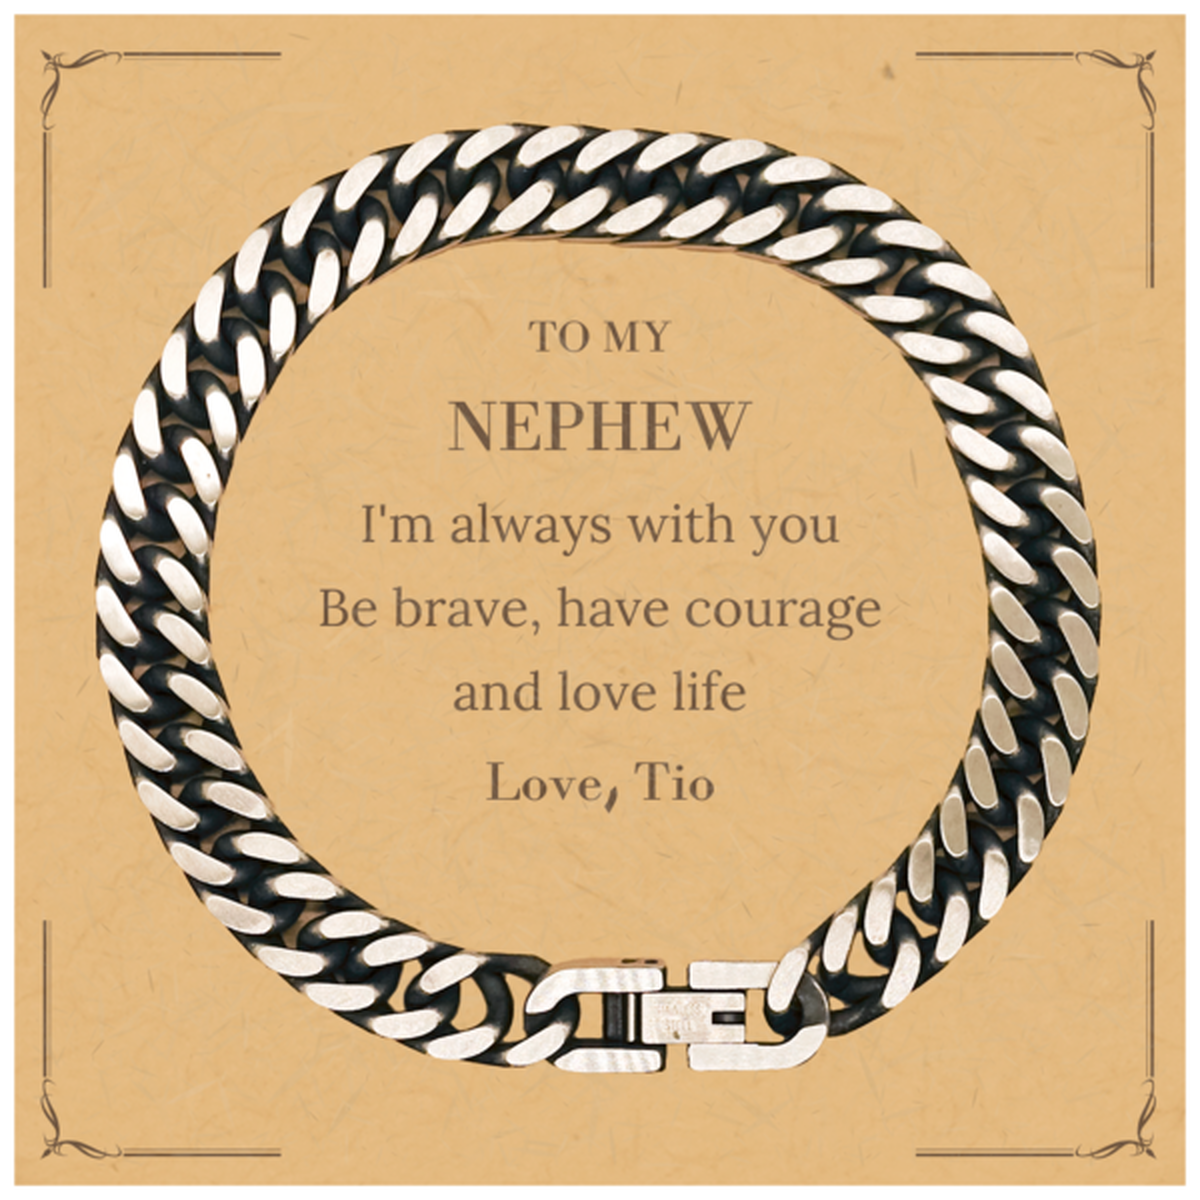 To My Nephew Gifts from Tio, Unique Cuban Link Chain Bracelet Inspirational Christmas Birthday Graduation Gifts for Nephew I'm always with you. Be brave, have courage and love life. Love, Tio